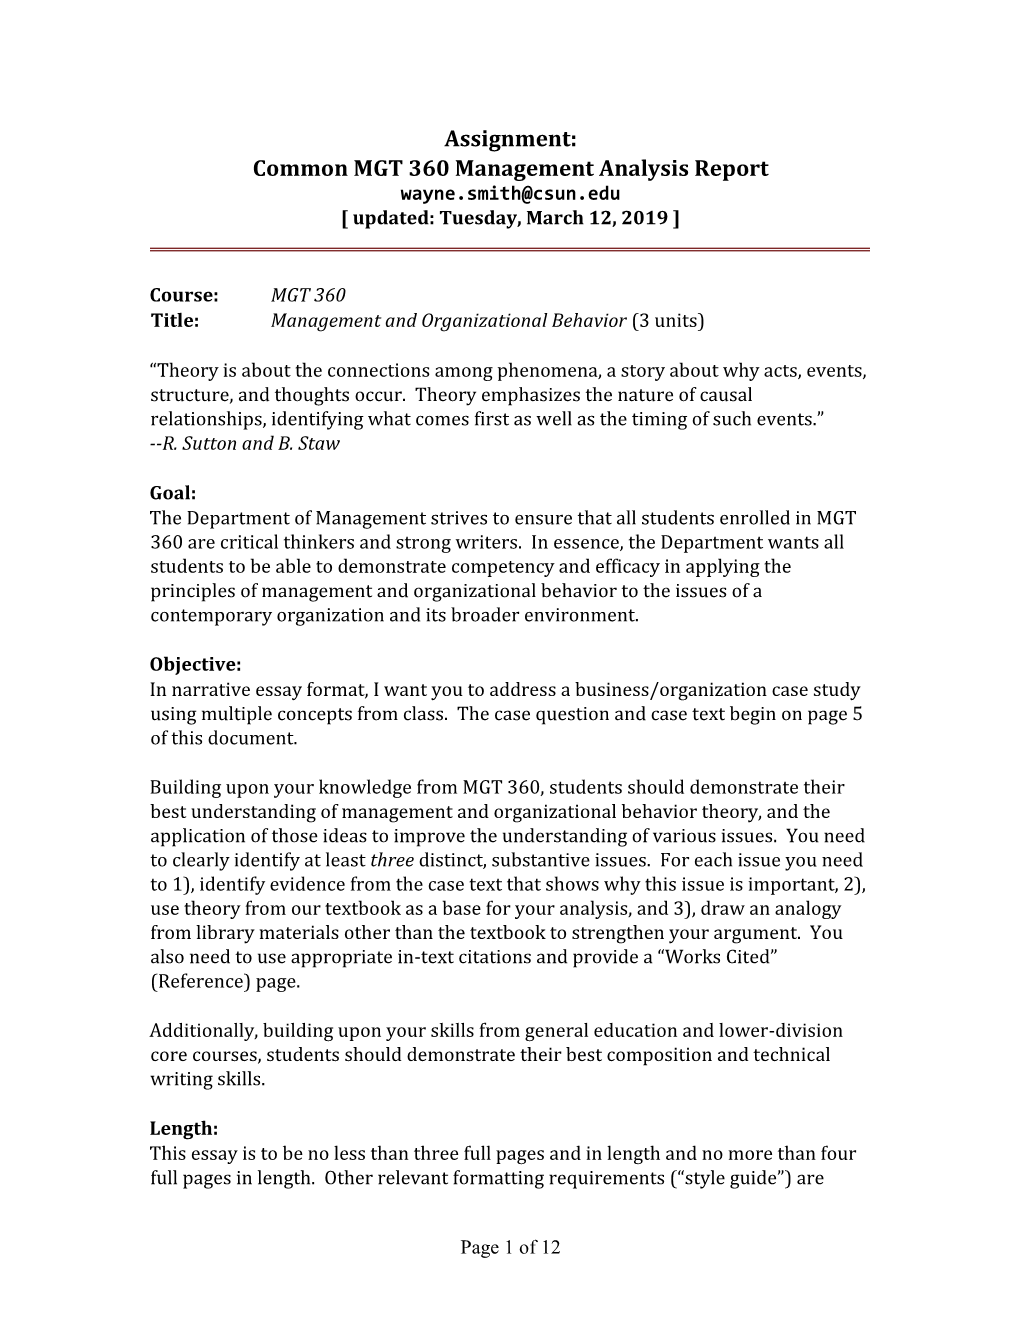 Assignment: Common MGT 360 Management Analysis Report Wayne.Smith@Csun.Edu [ Updated: Tuesday, March 12, 2019 ]